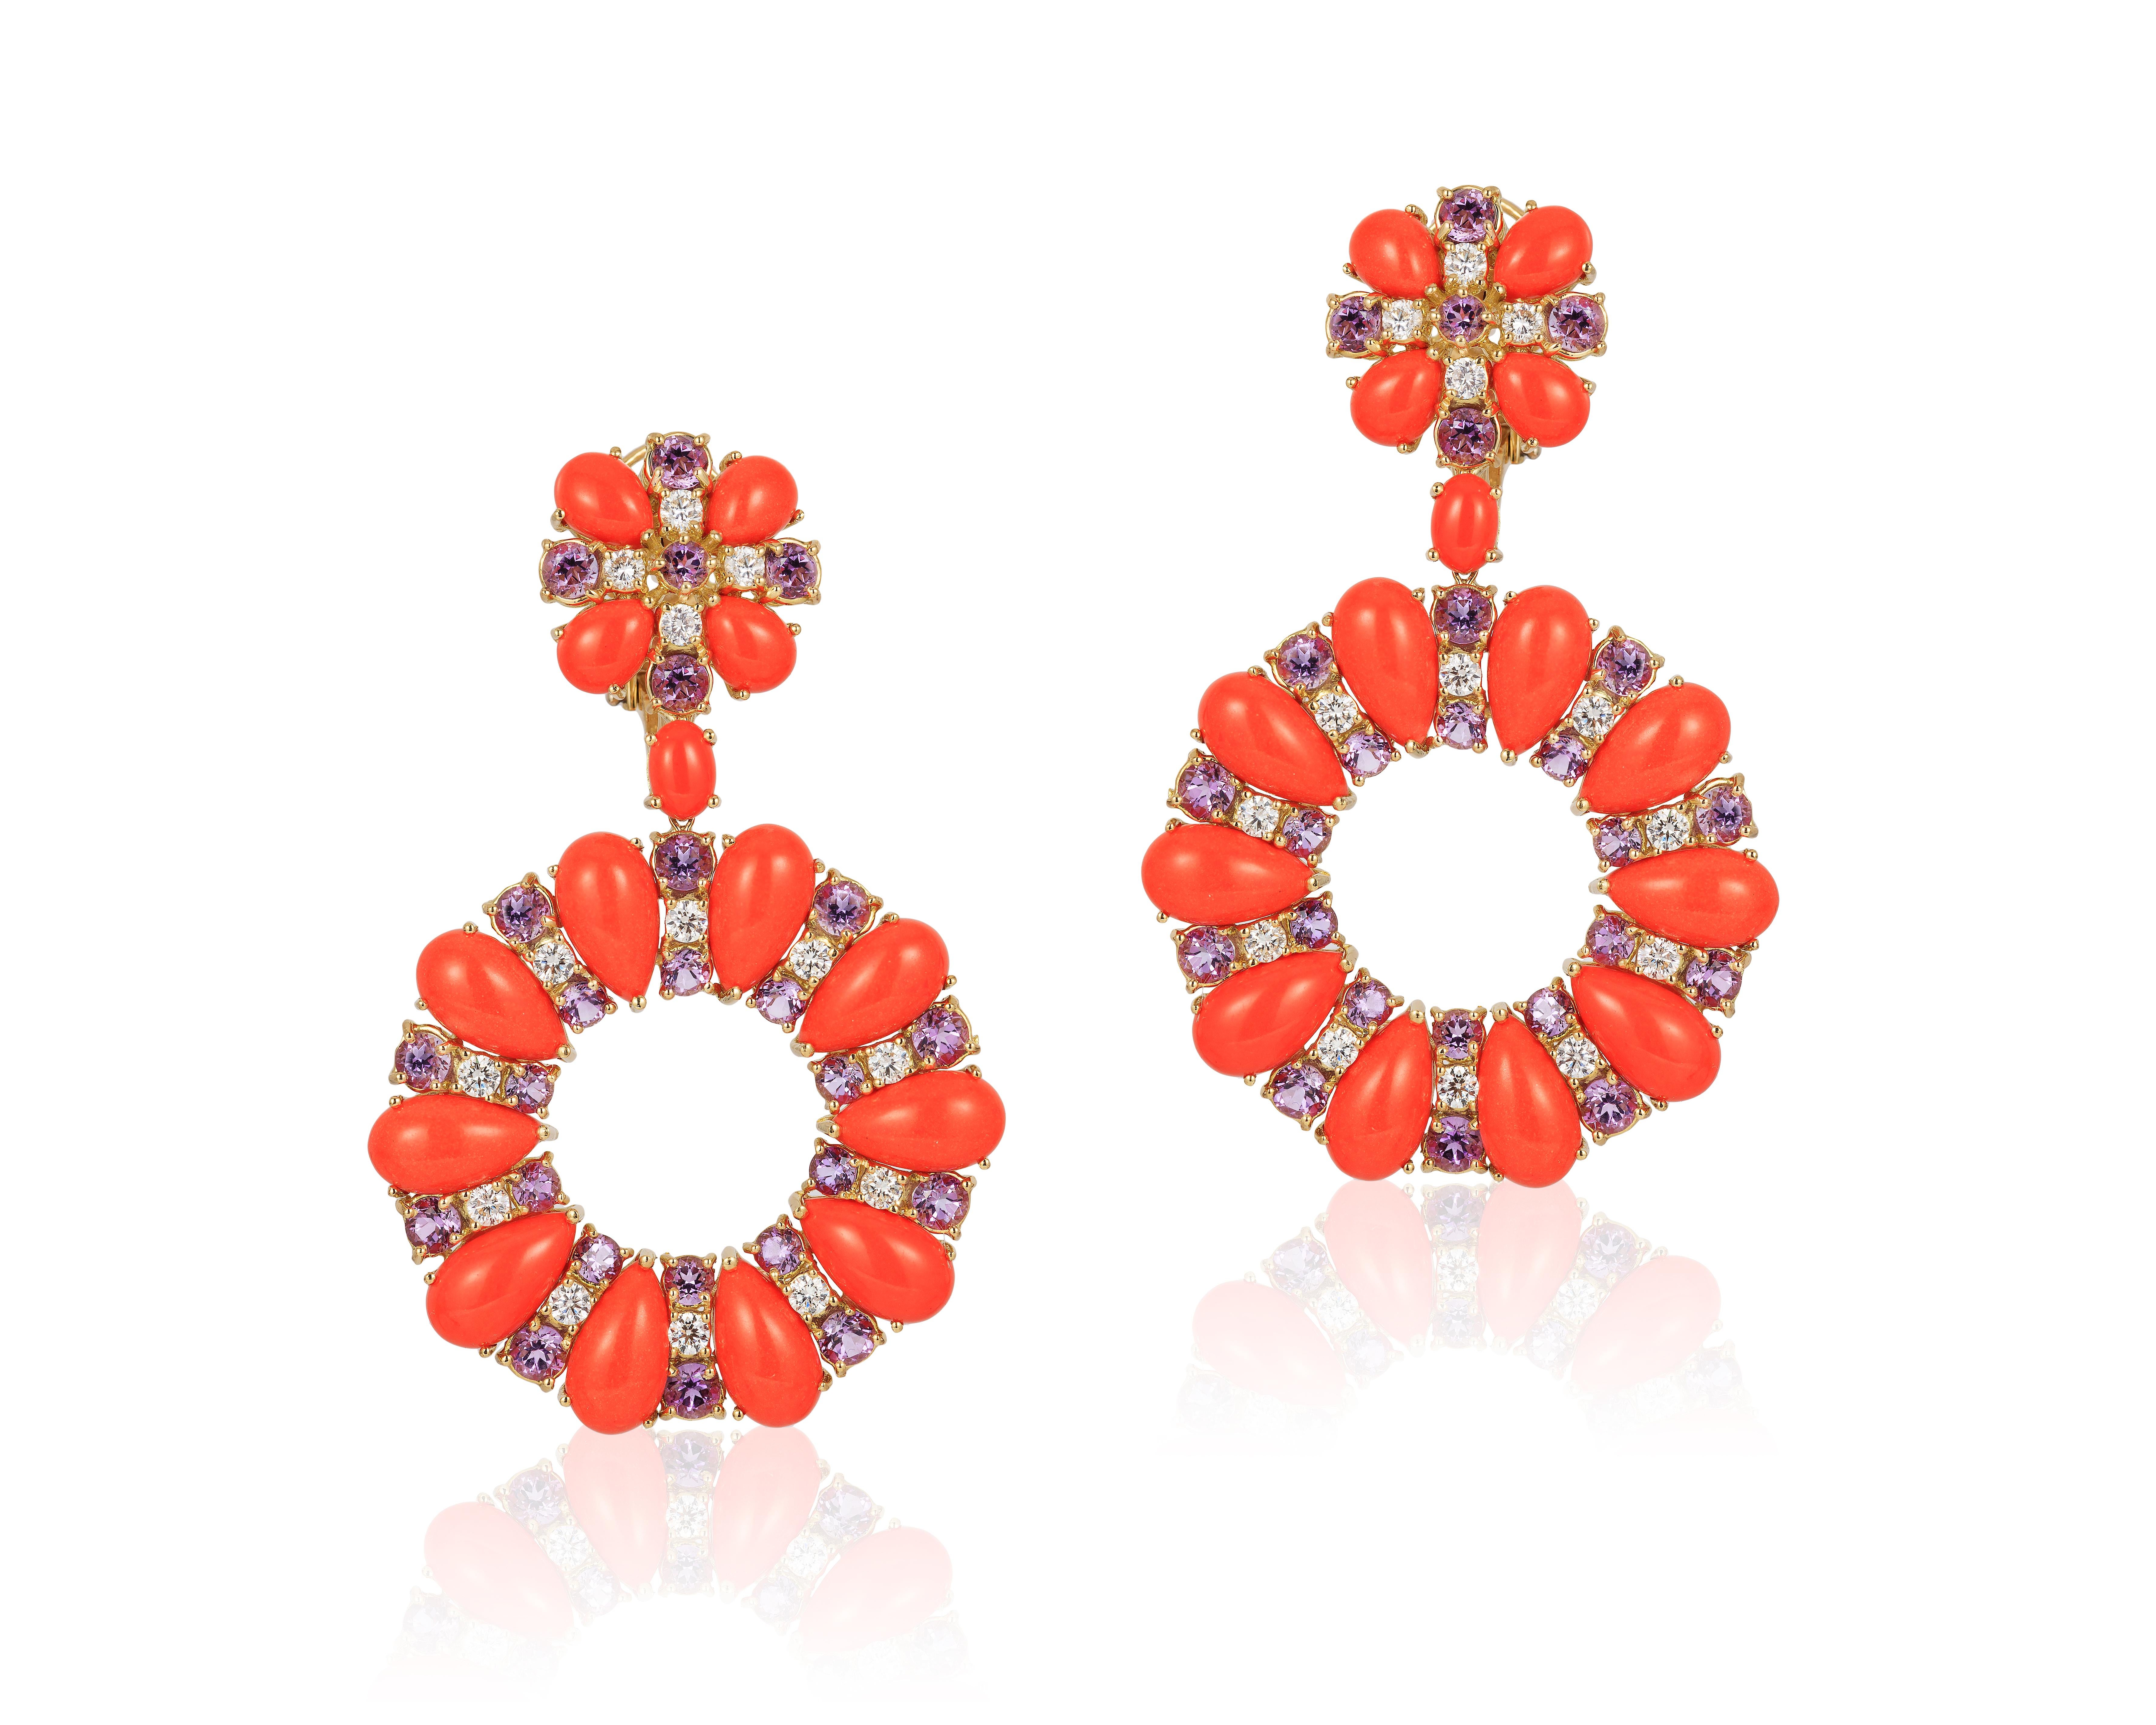 Andreoli Reconstitued Coral Amethyst Diamond Chandelier Earrings 18k White Gold

These earrings feature:

- 1.84 carat Diamond
- 6.89 carat Amethyst
- 7.50 grams Reconstituted Italian Coral
- 30.40 grams 18 karat yellow gold
- Made in Italy